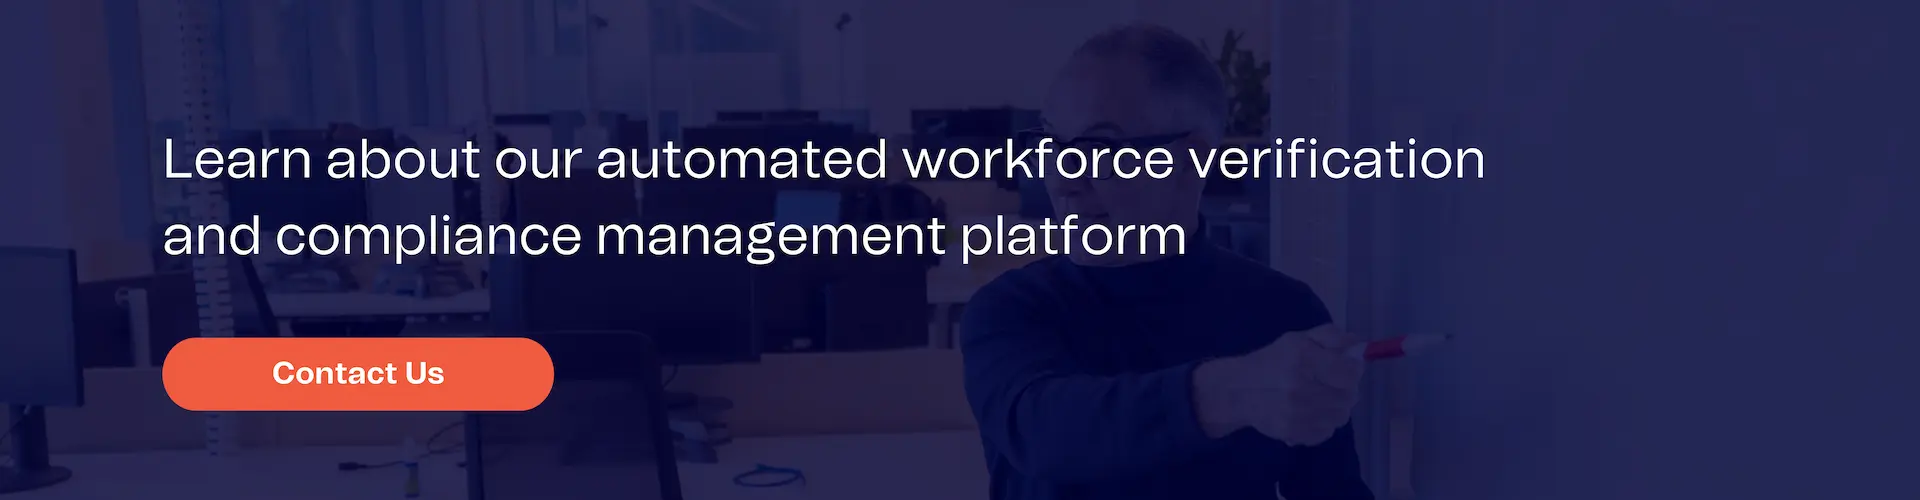 Learn about our automated workforce verification and compliance management platform. Contact us today.